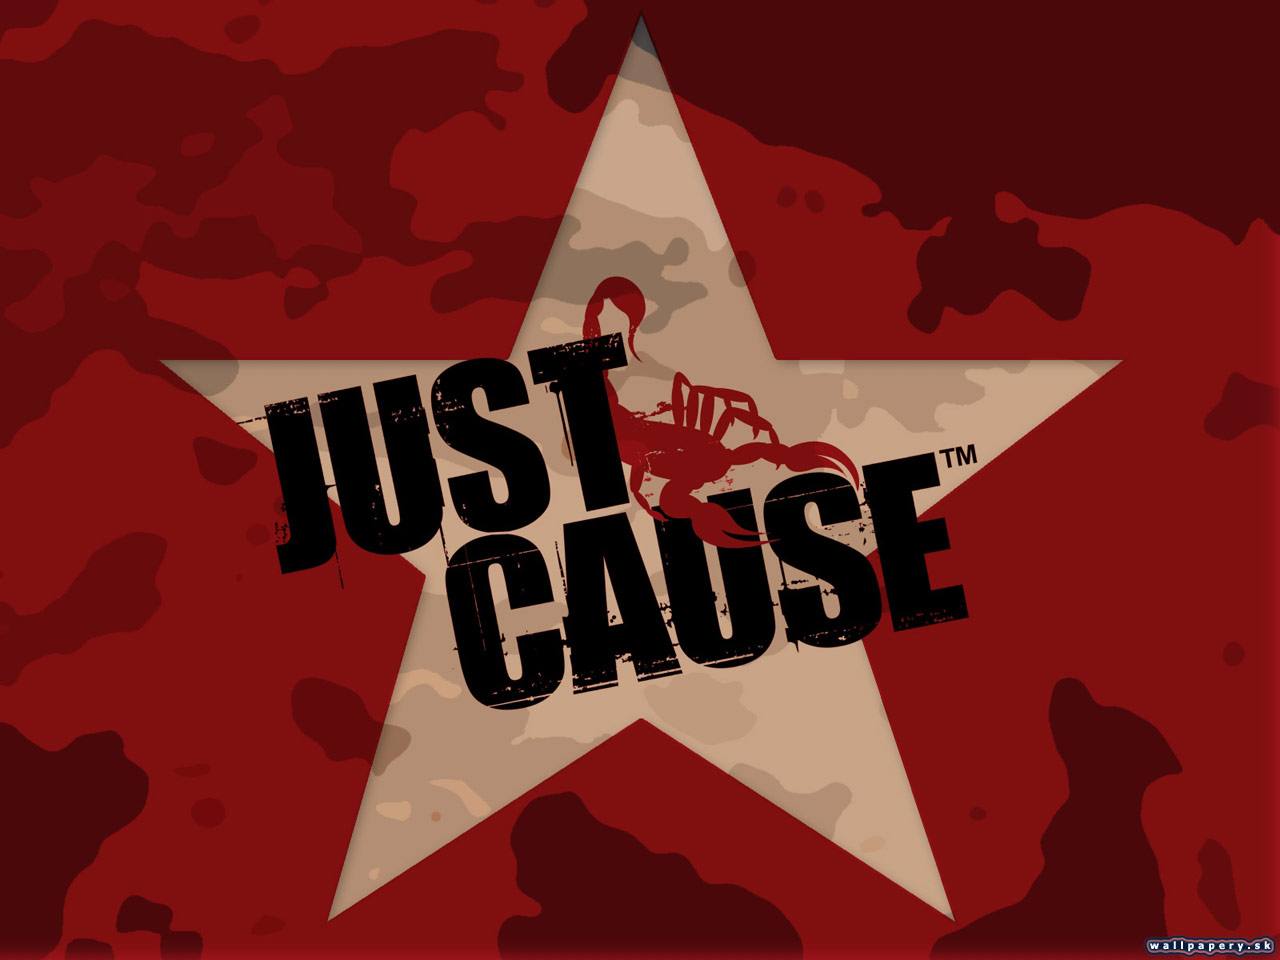 Just Cause - wallpaper 10